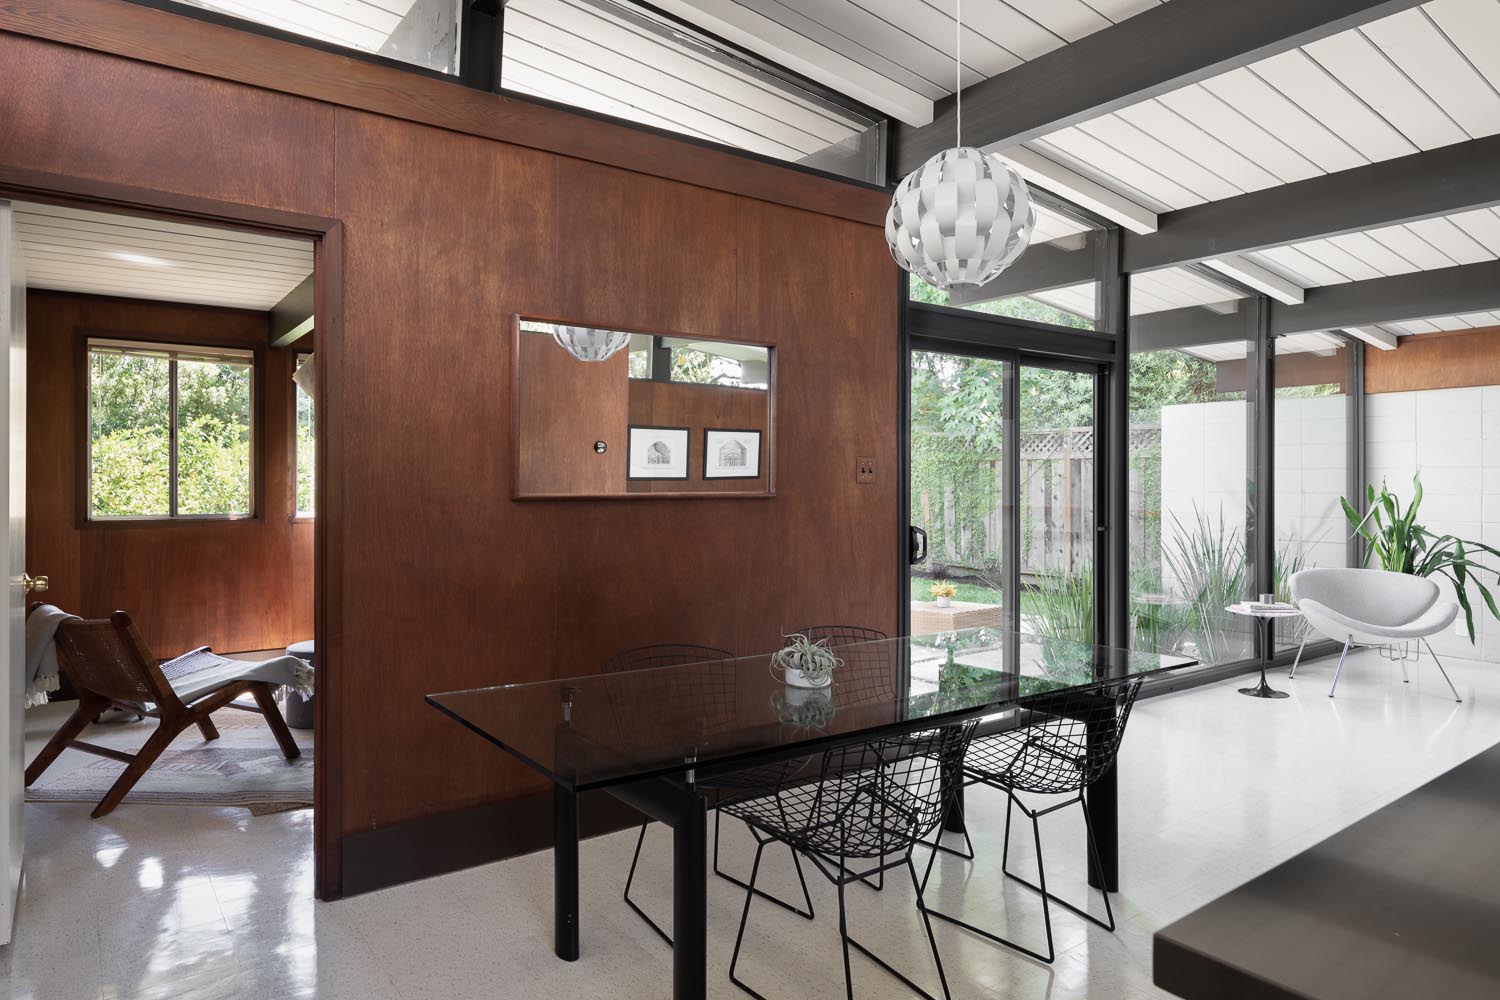 The restoration of an Eichler home included refinishing the wood panel walls.